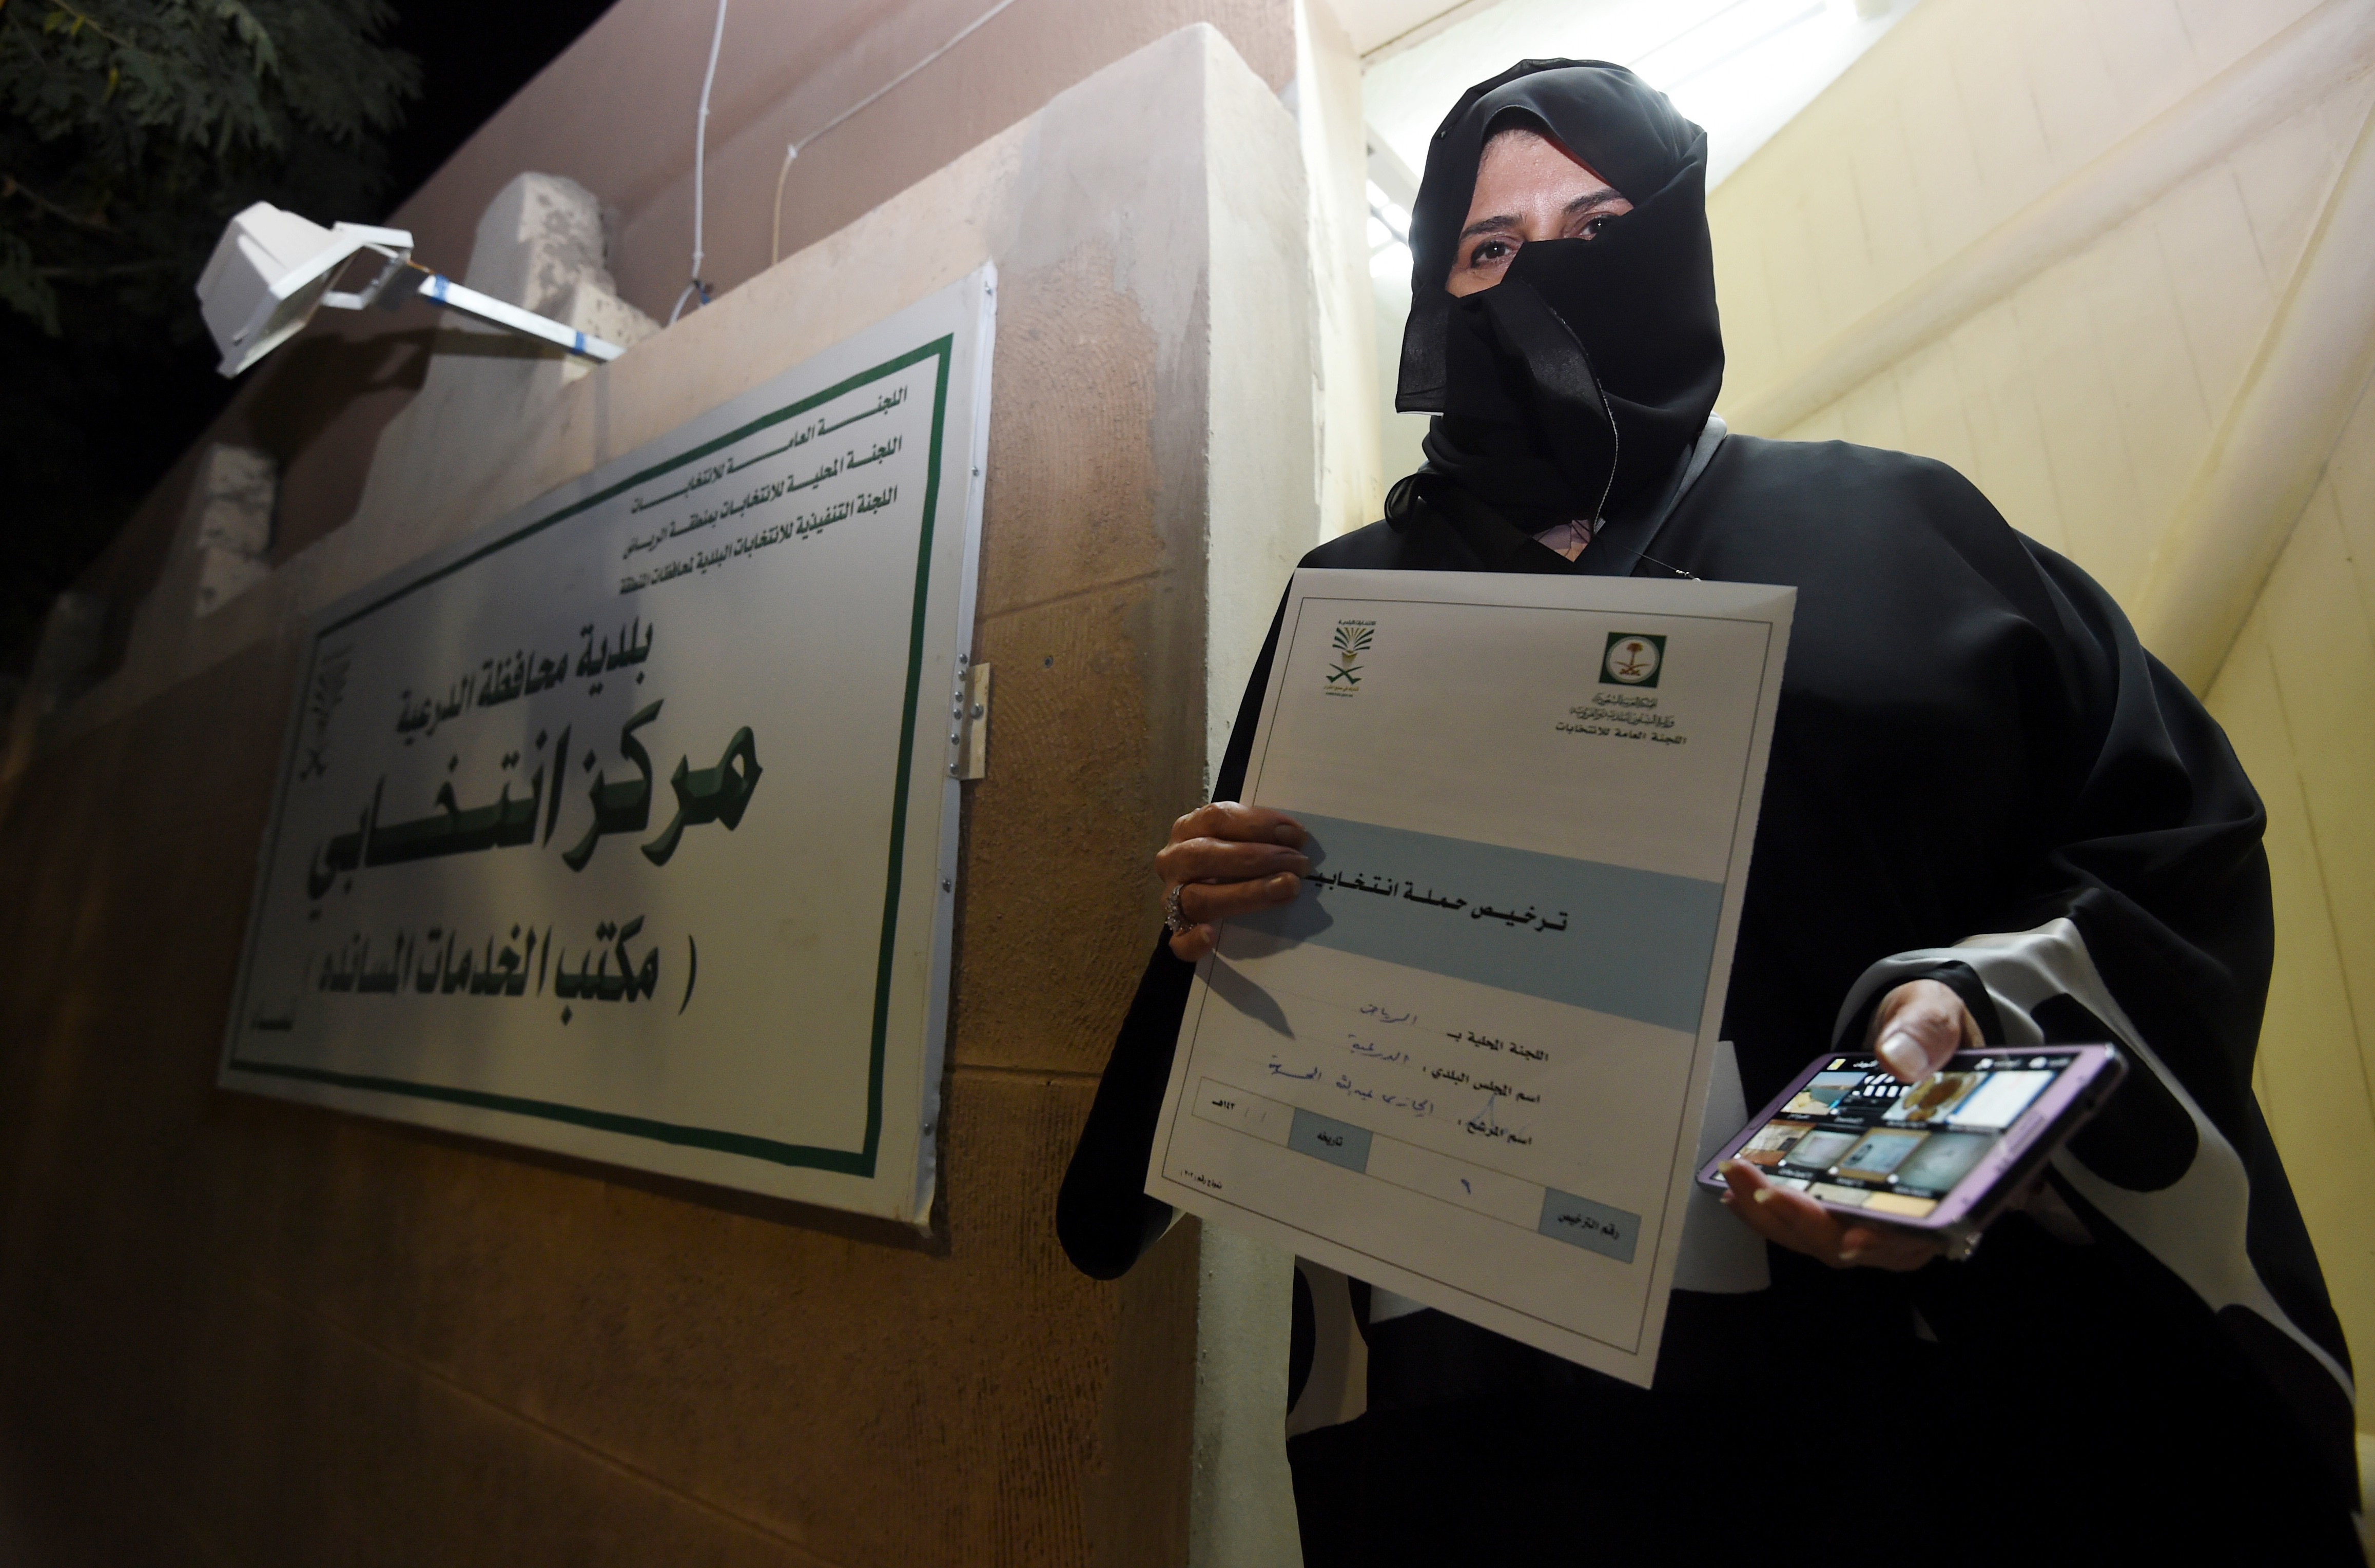 Aljazi al-Hussaini, a candidate for the municipal council in the town of Diriyah, on the outskirts of the Saudi capital Riyadh, shows an electoral campaign license issued by the central municipal elections committee on November 29, 2015. (FAYEZ NURELDINE&mdash;AFP/Getty Images)